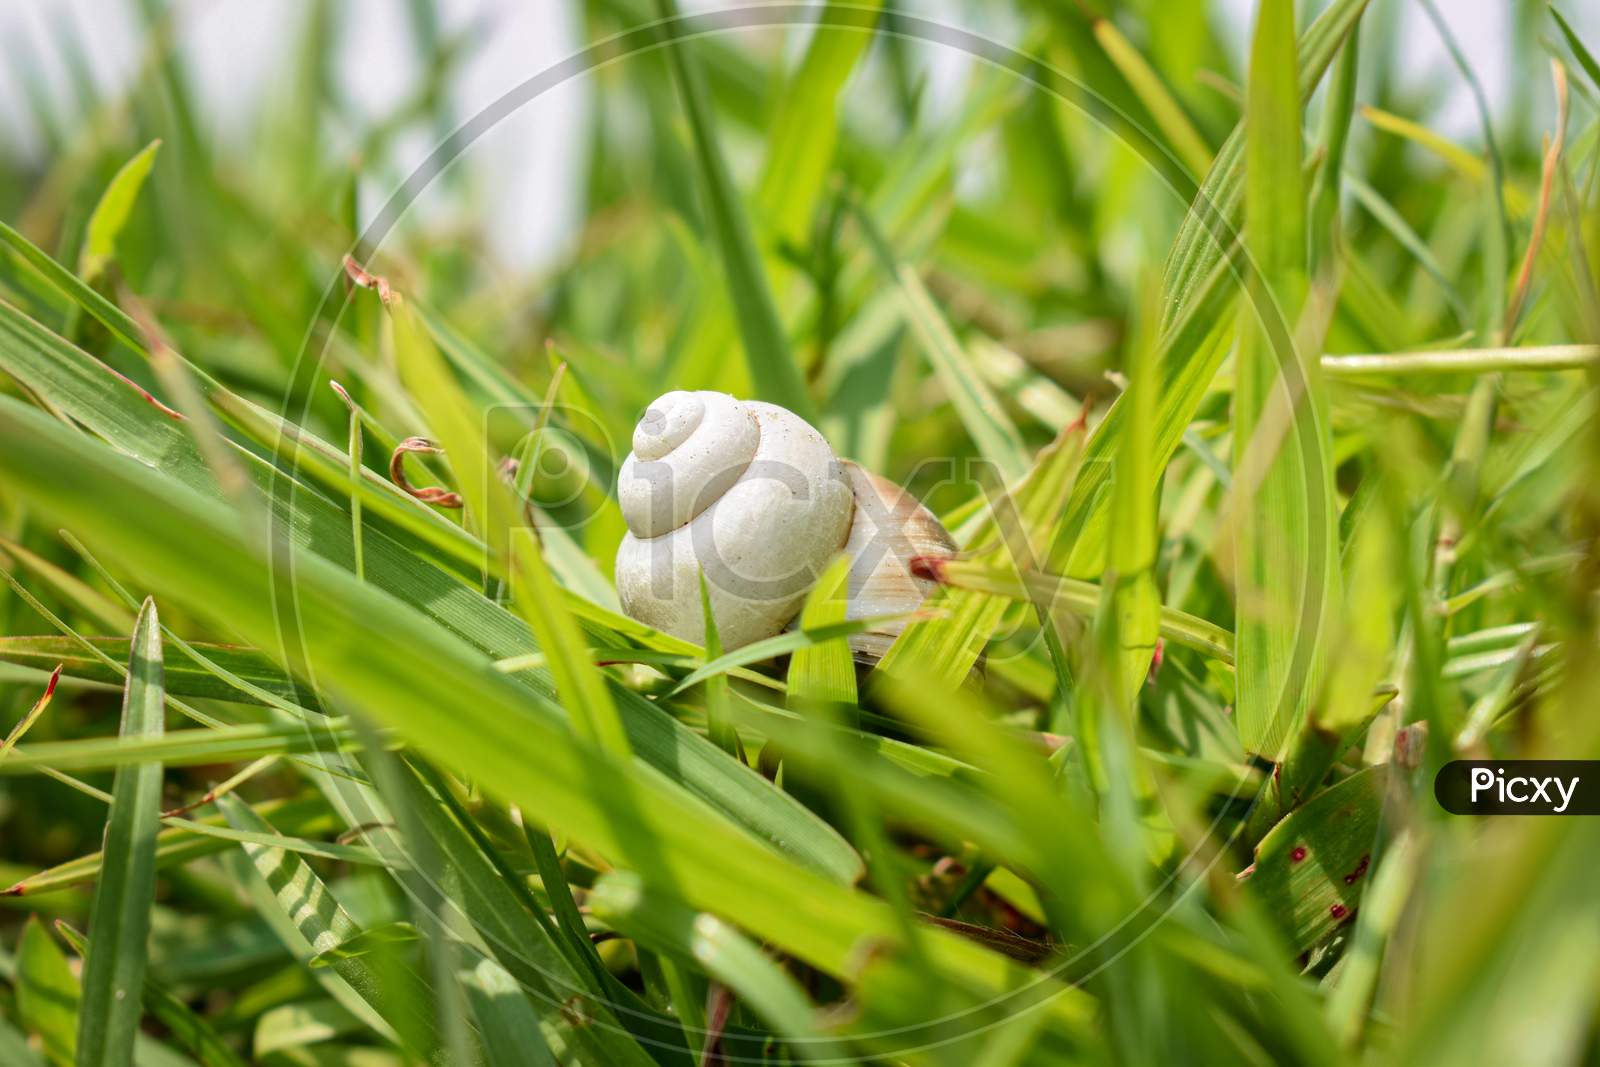 snail on the grass, natural beauty